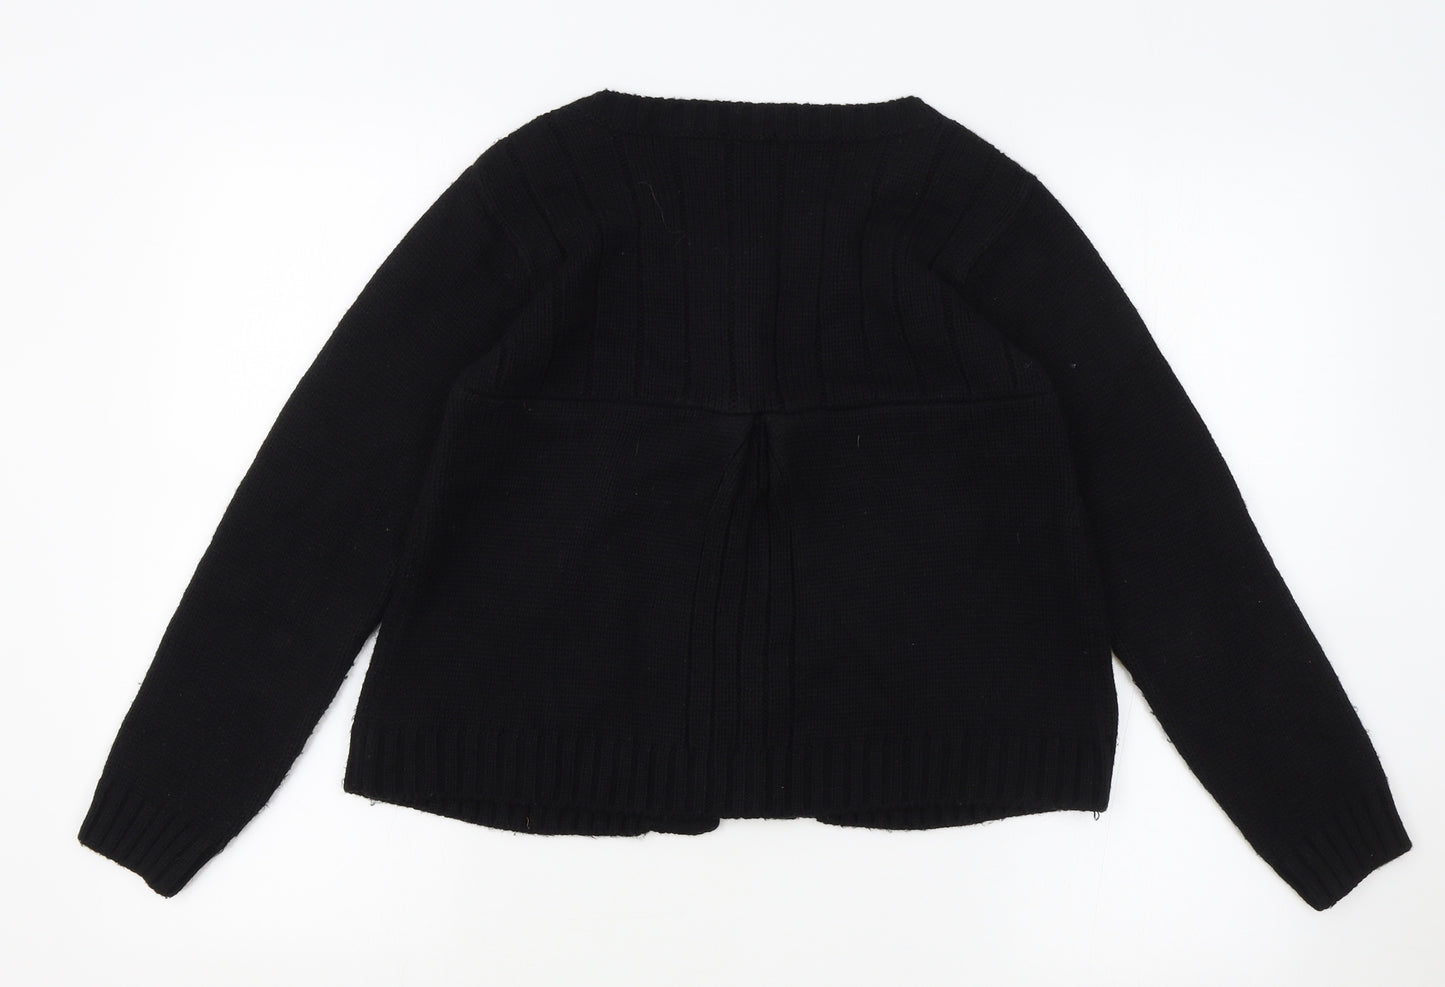 Marks and Spencer Girls Black Round Neck Acrylic Cardigan Jumper Size 14 Years Button